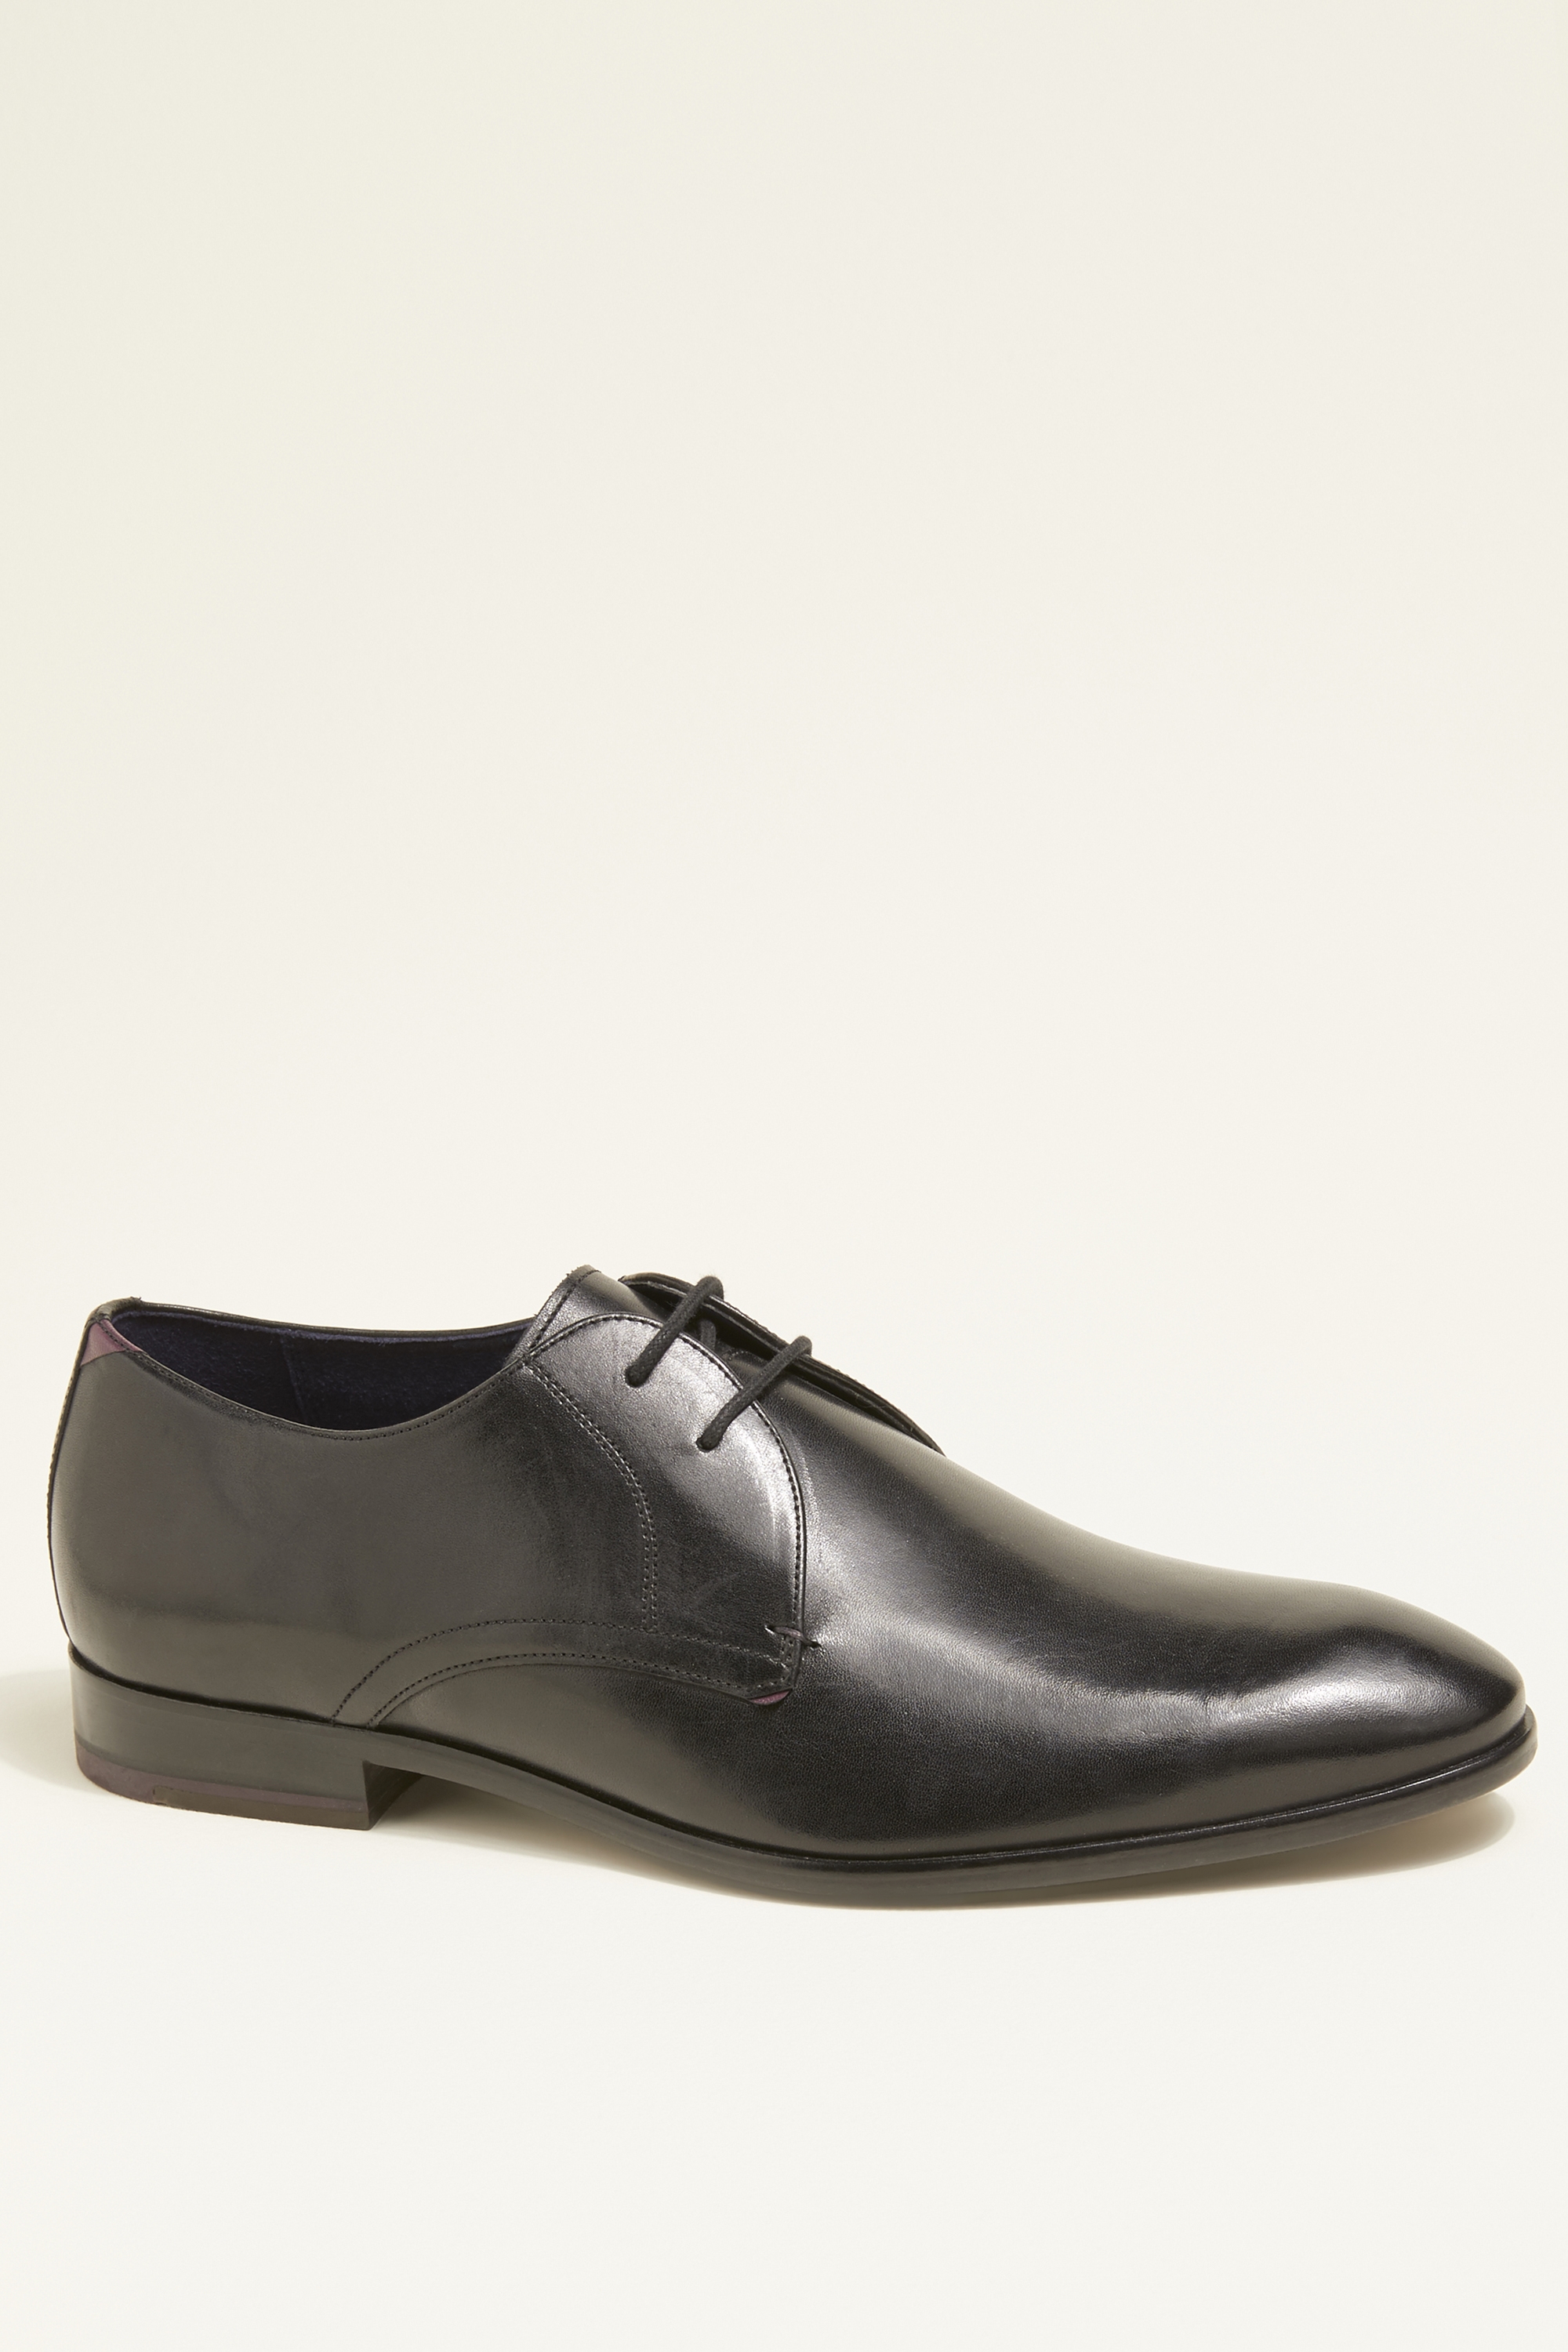 ted baker shoes 2019